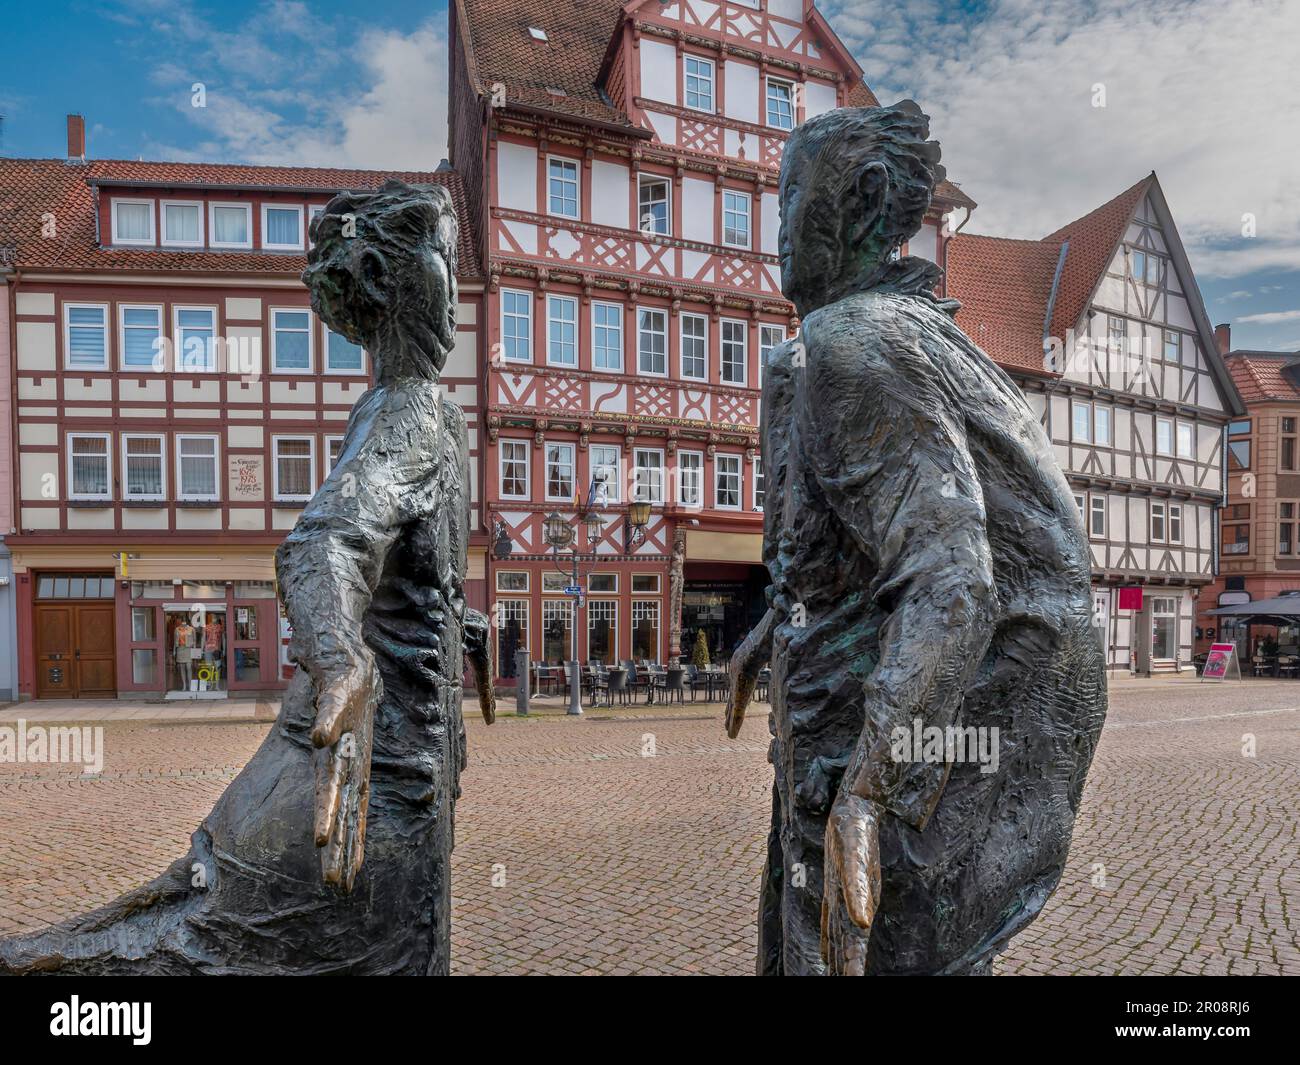 Reunification fountain in Duderstadt, Germany Stock Photo